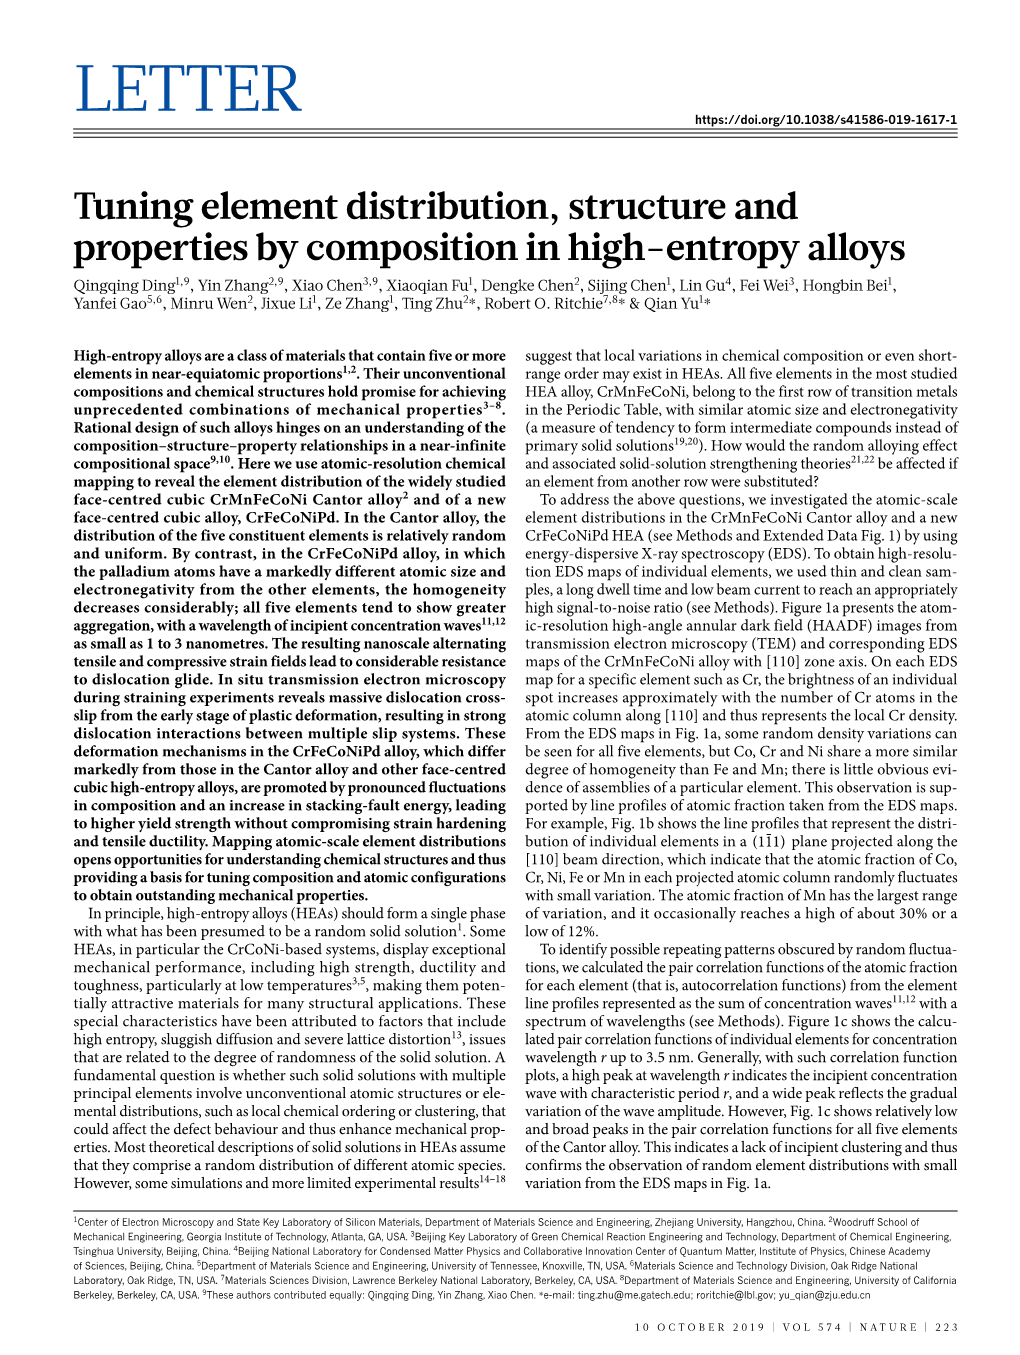 Tuning Element Distribution, Structure and Properties by Composition In